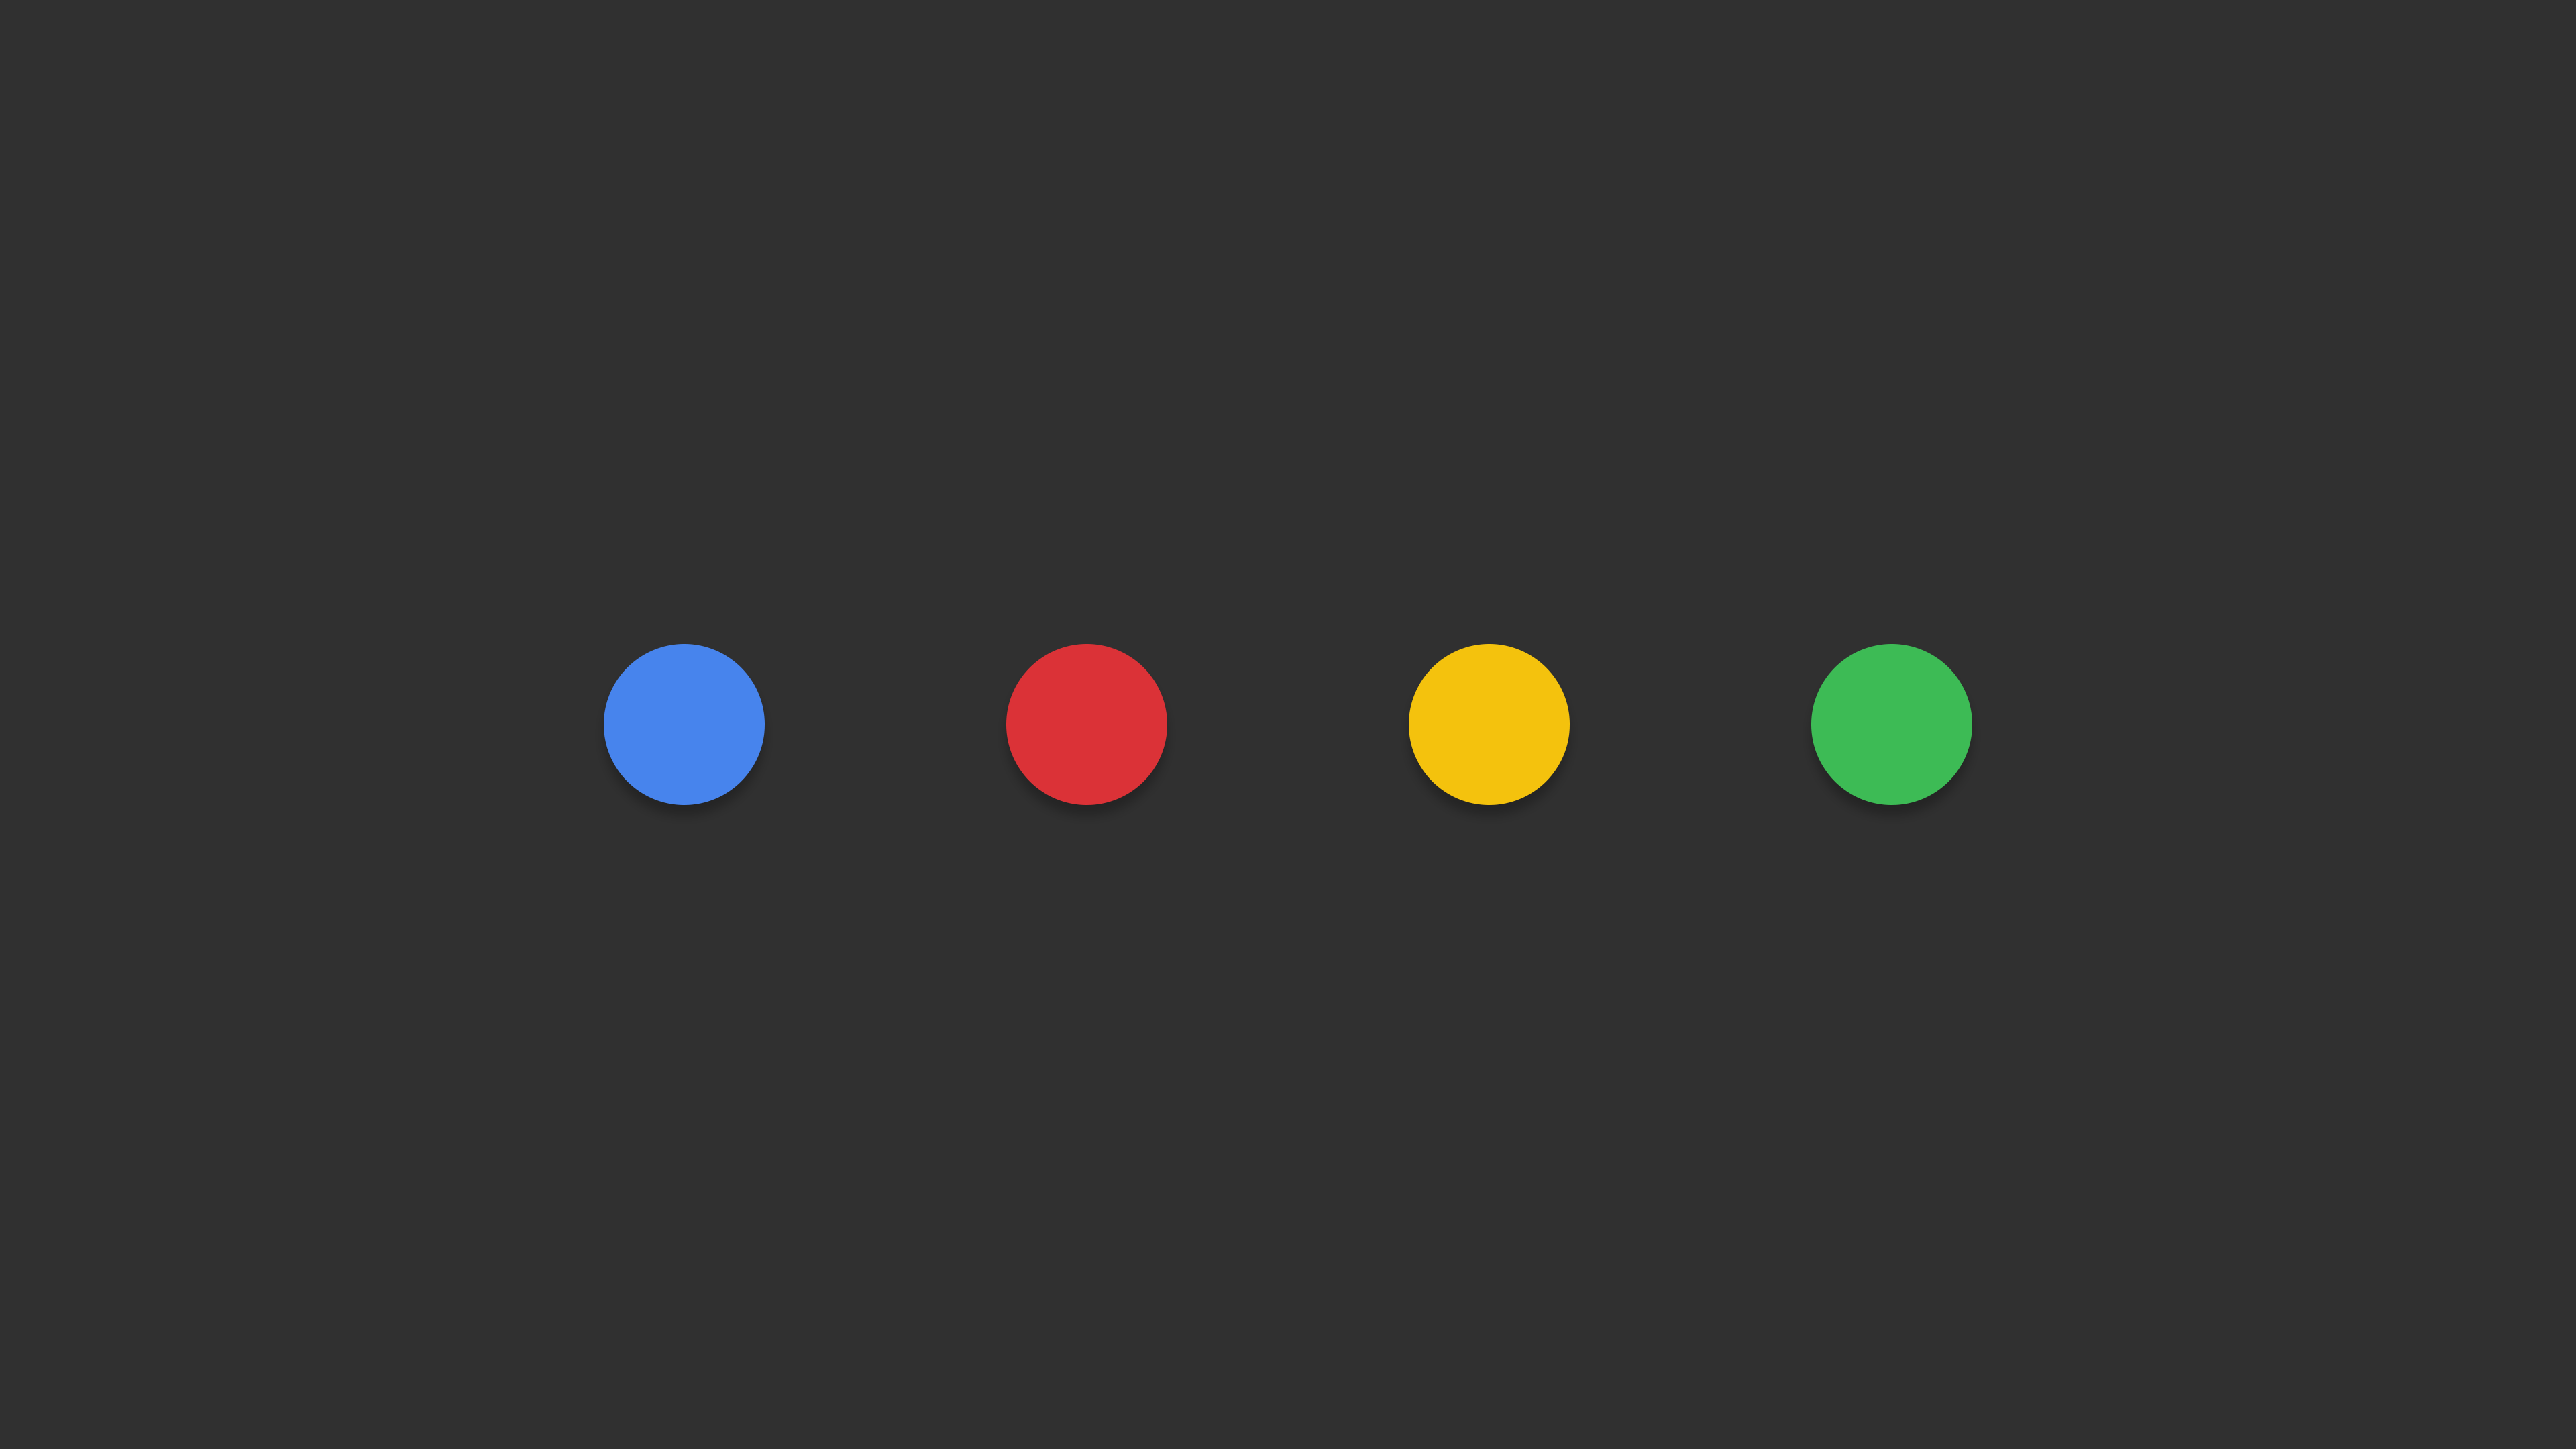 Google Dots Wallpaper V2 Now With Amoled